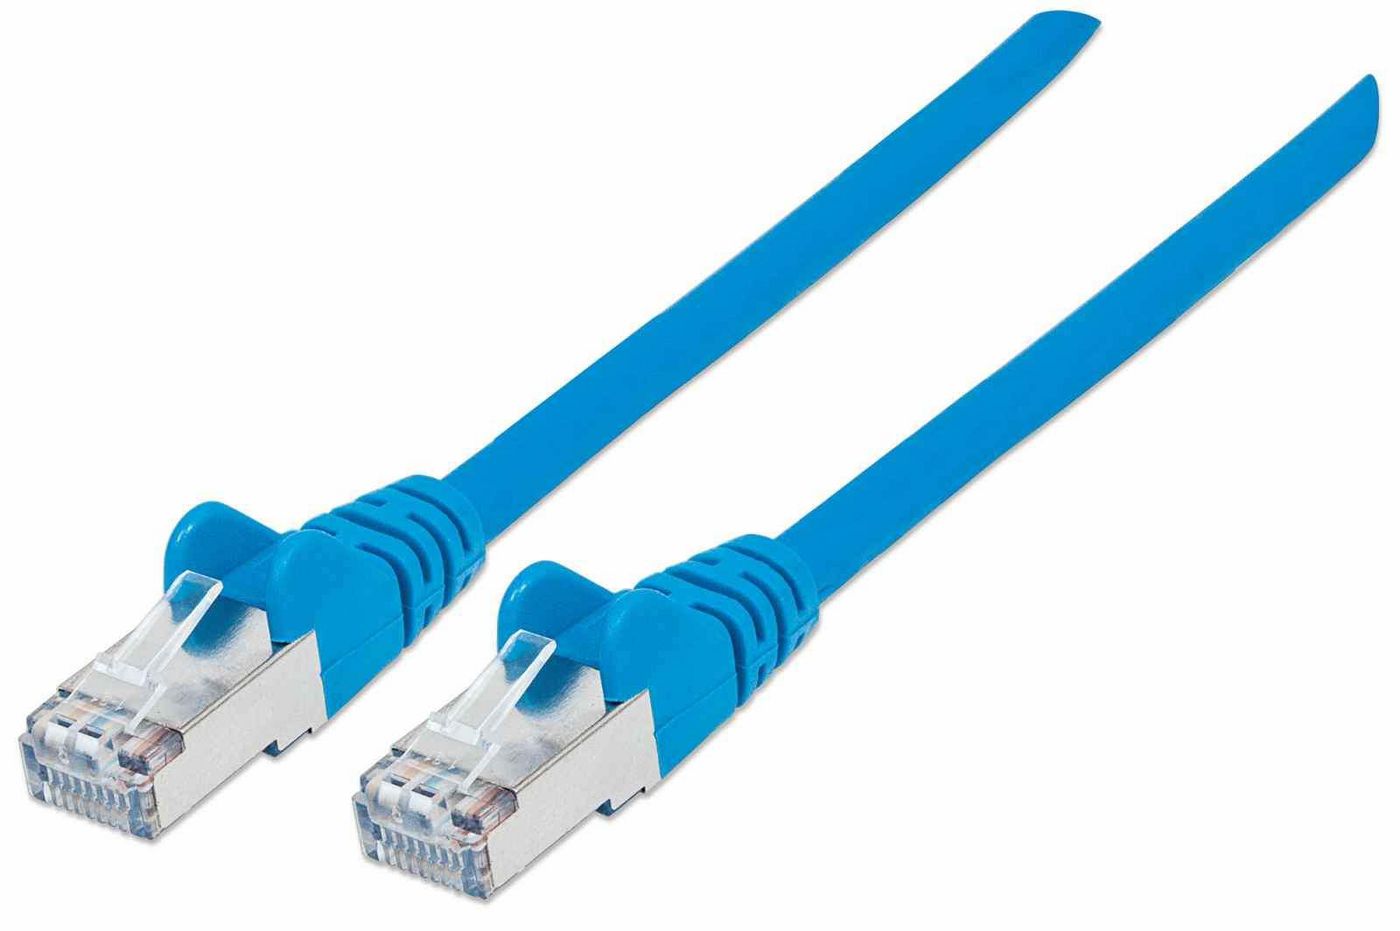 Intellinet 740609 High Performance Network Cable 